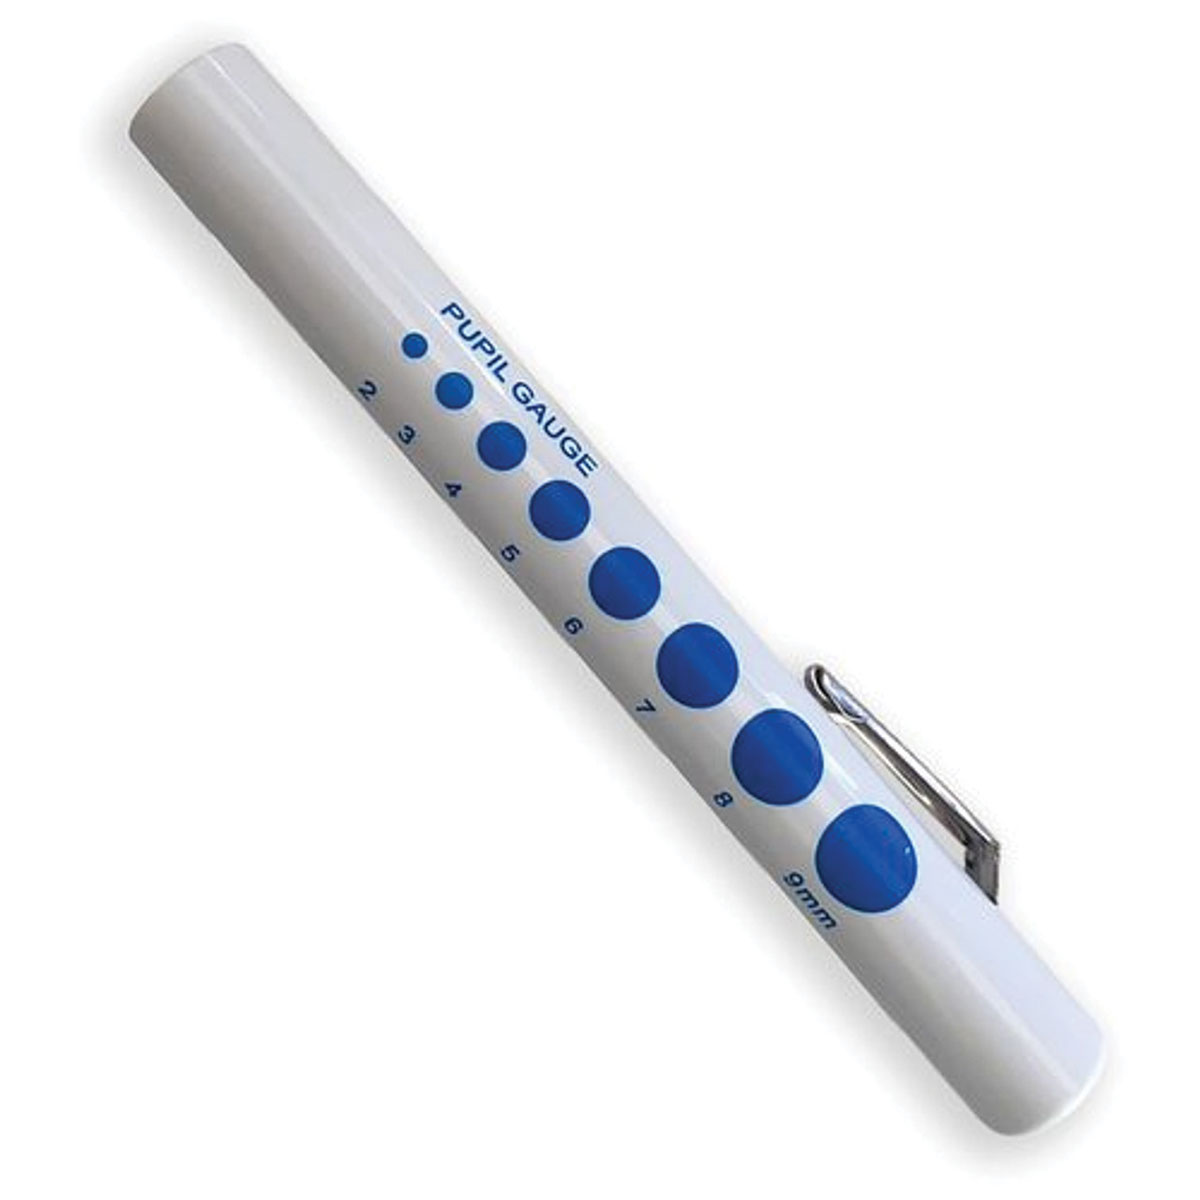 Fig. 10. A pupil gauge can help you quickly and more accurately measure pupil size. I keep a small laminated paper handy, but this one is printed directly on a penlight for convenience. Check and measure pupils very carefully in both bright and dim illumination.